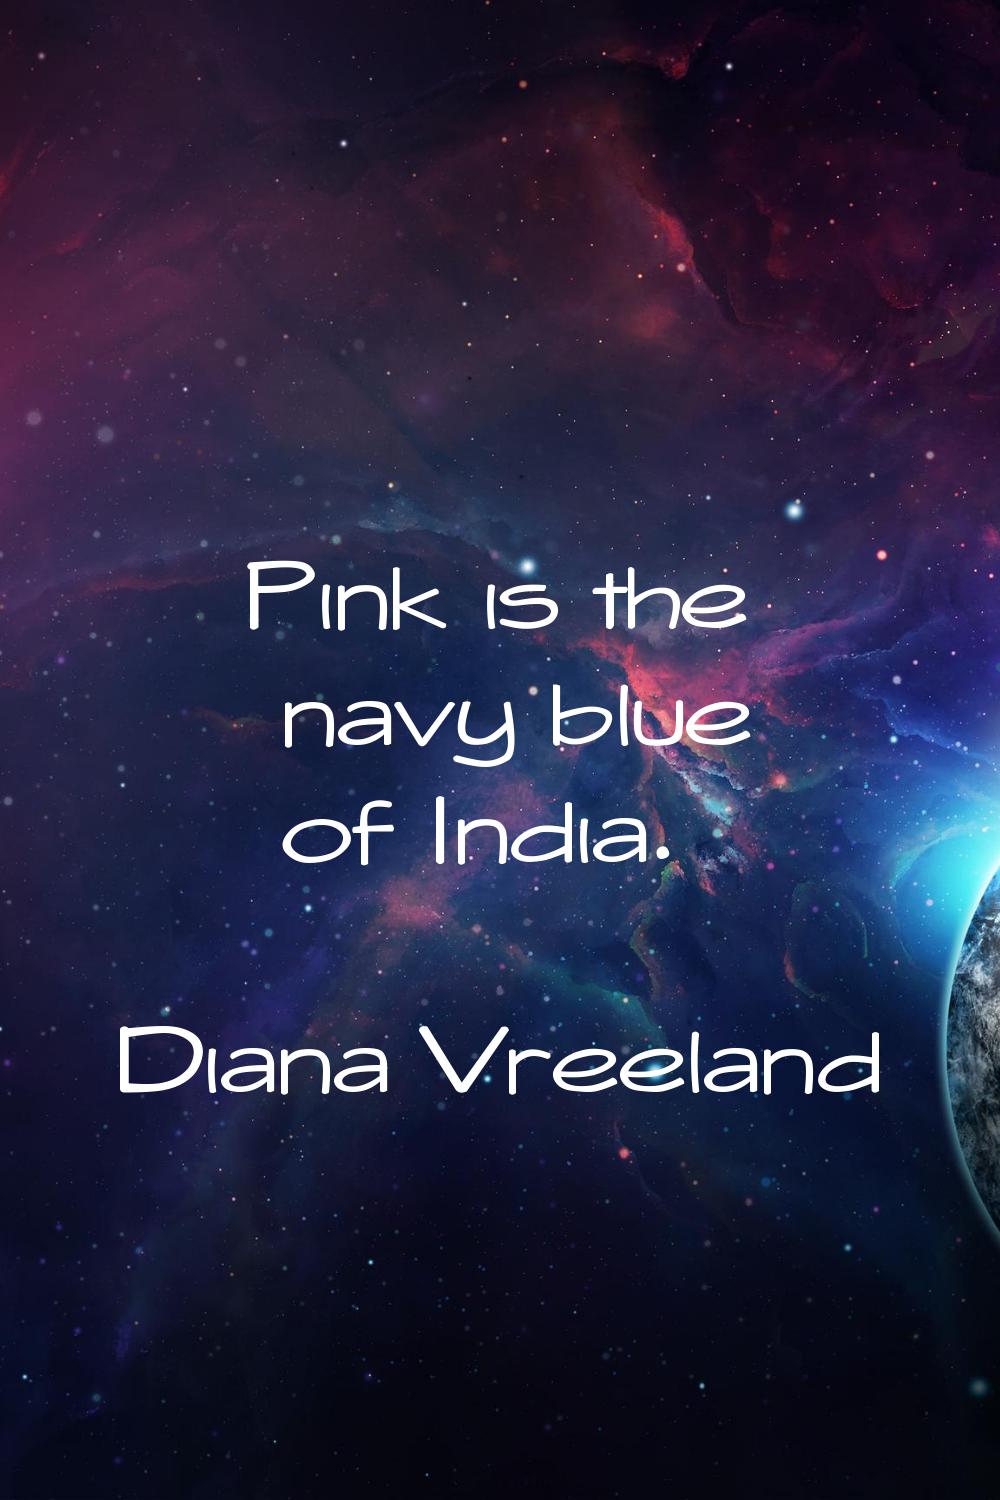 Pink is the navy blue of India.